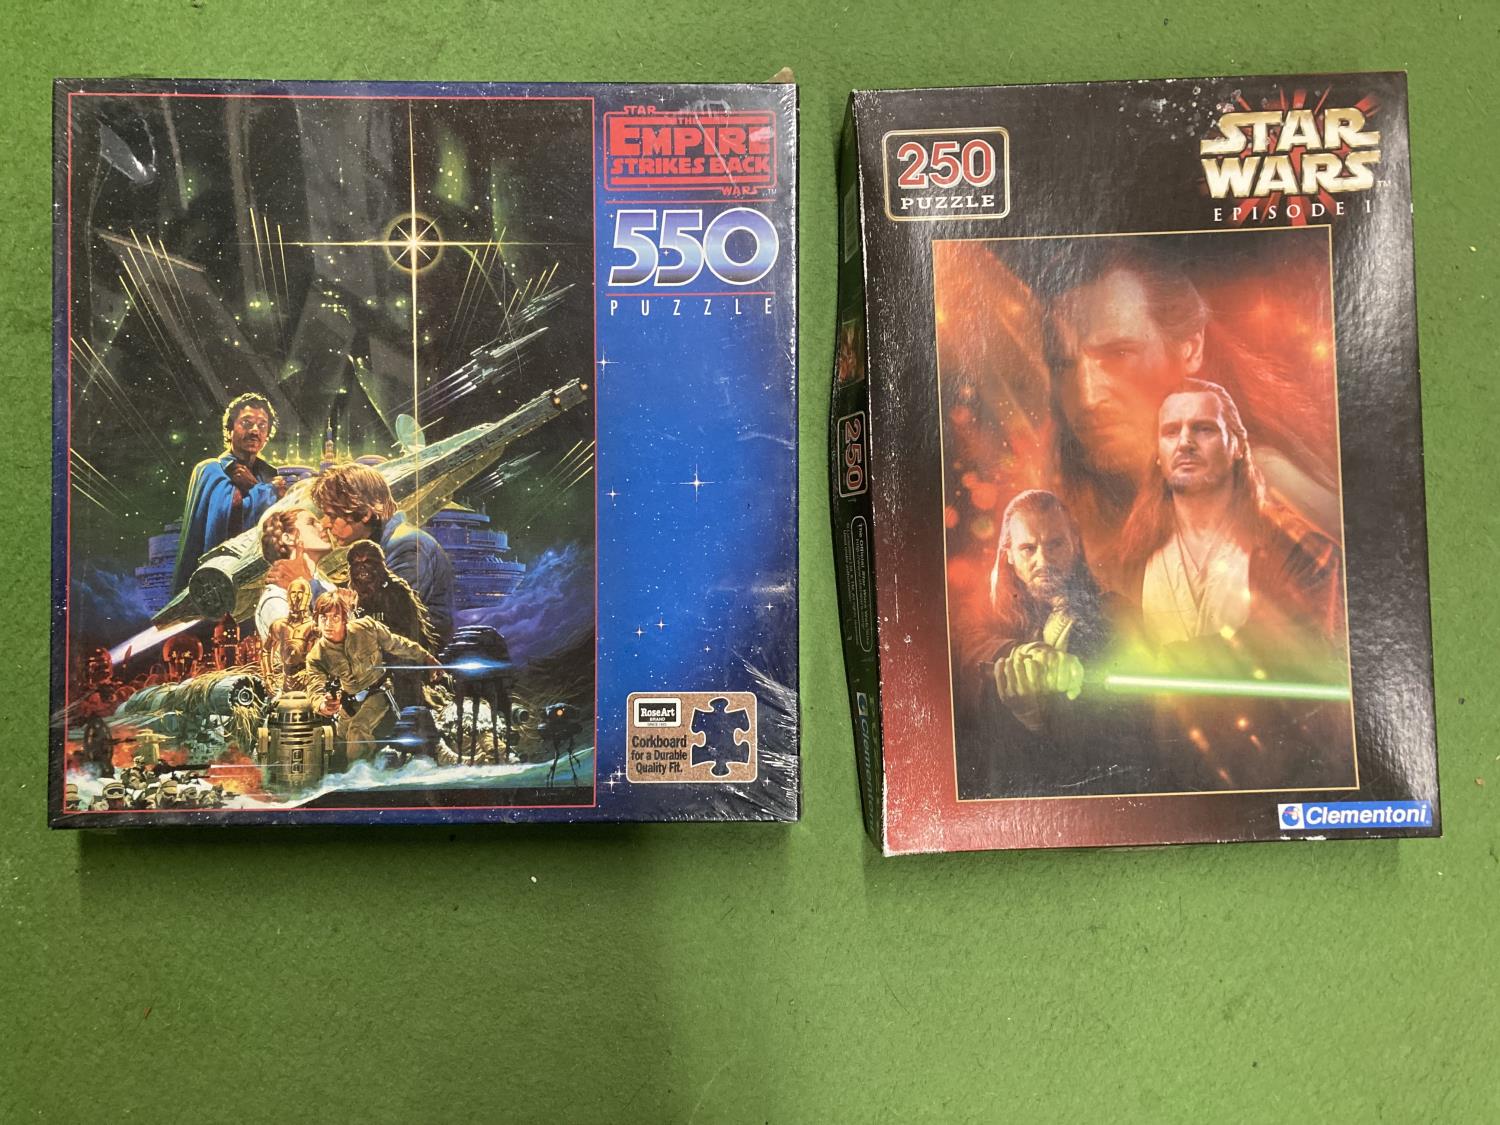 TWO STAR WARS JIGSAW PUZZLES - STAR WARS EPISODE 1 AND THE EMPIRE STRIKES BACK